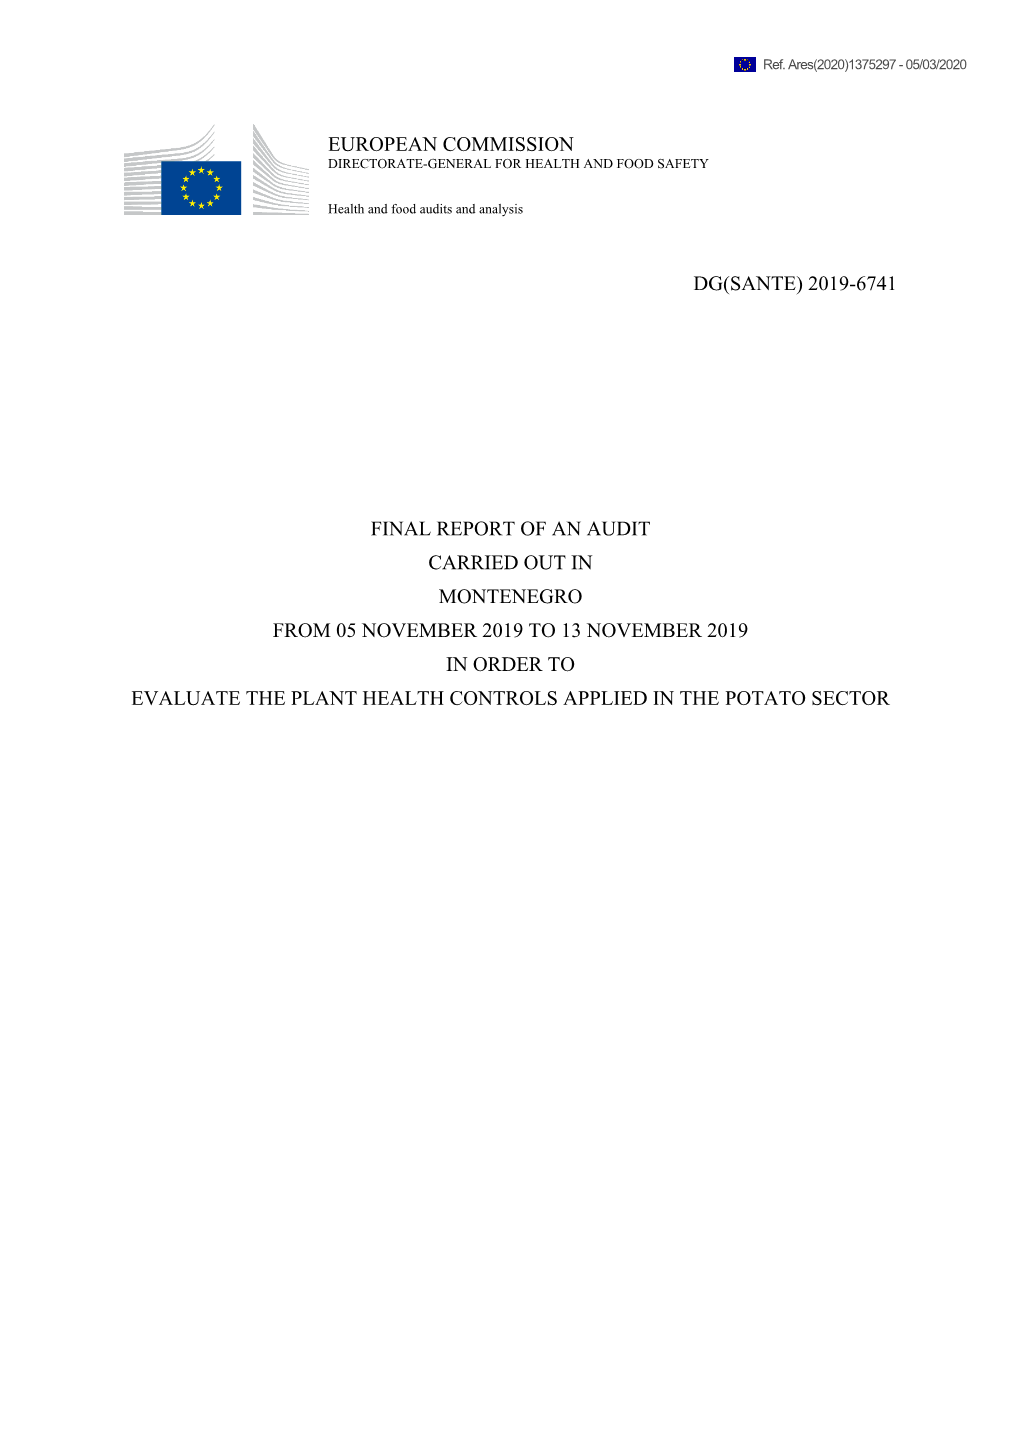 European Commission Dg(Sante) 2019-6741 Final Report of an Audit Carried out in Montenegro from 05 November 2019 to 13 November